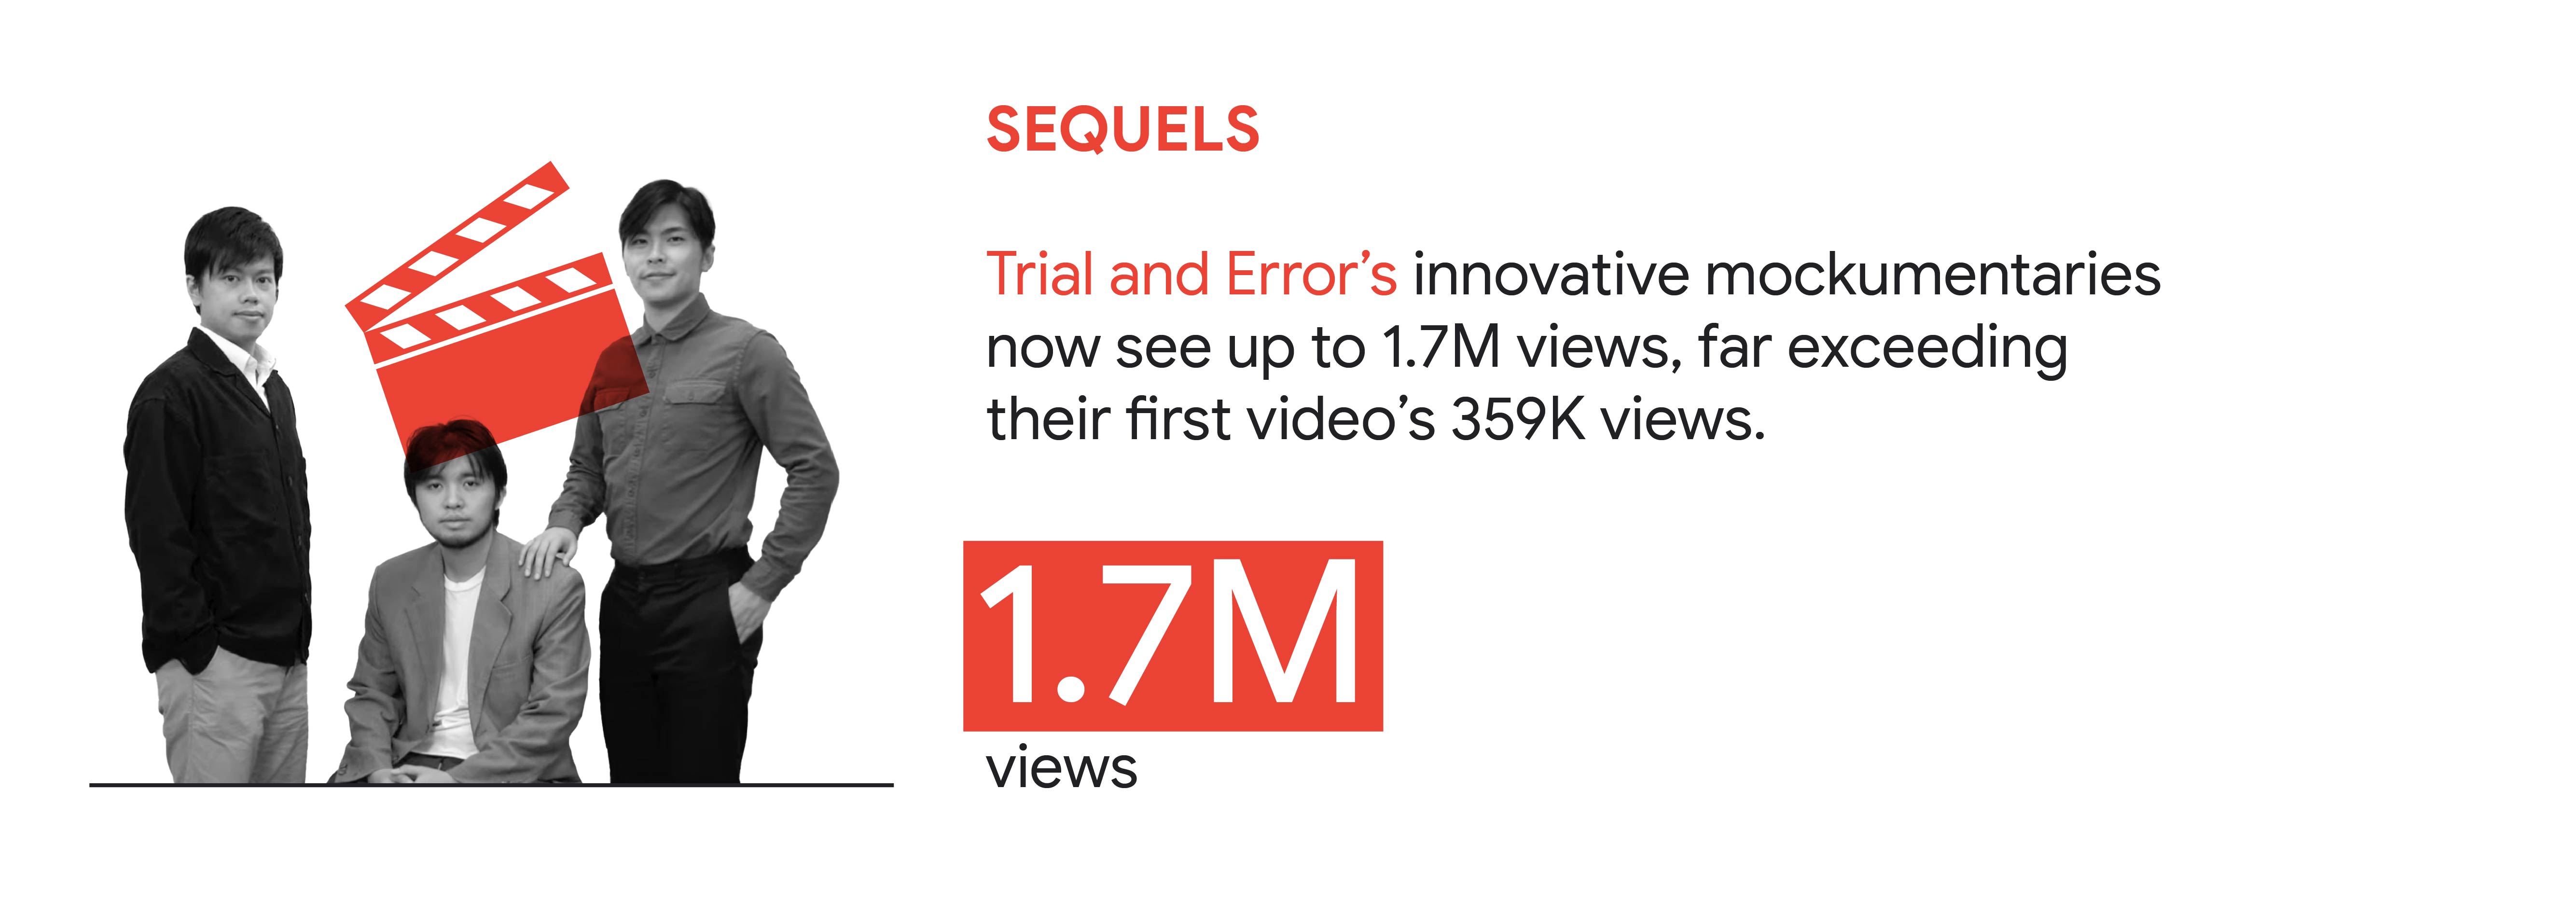 YouTube trend 1: Sequels. In Hong Kong, Trial and Error’s innovative mockumentaries now see up to 1.7M views, far exceeding their first video’s 359K views.